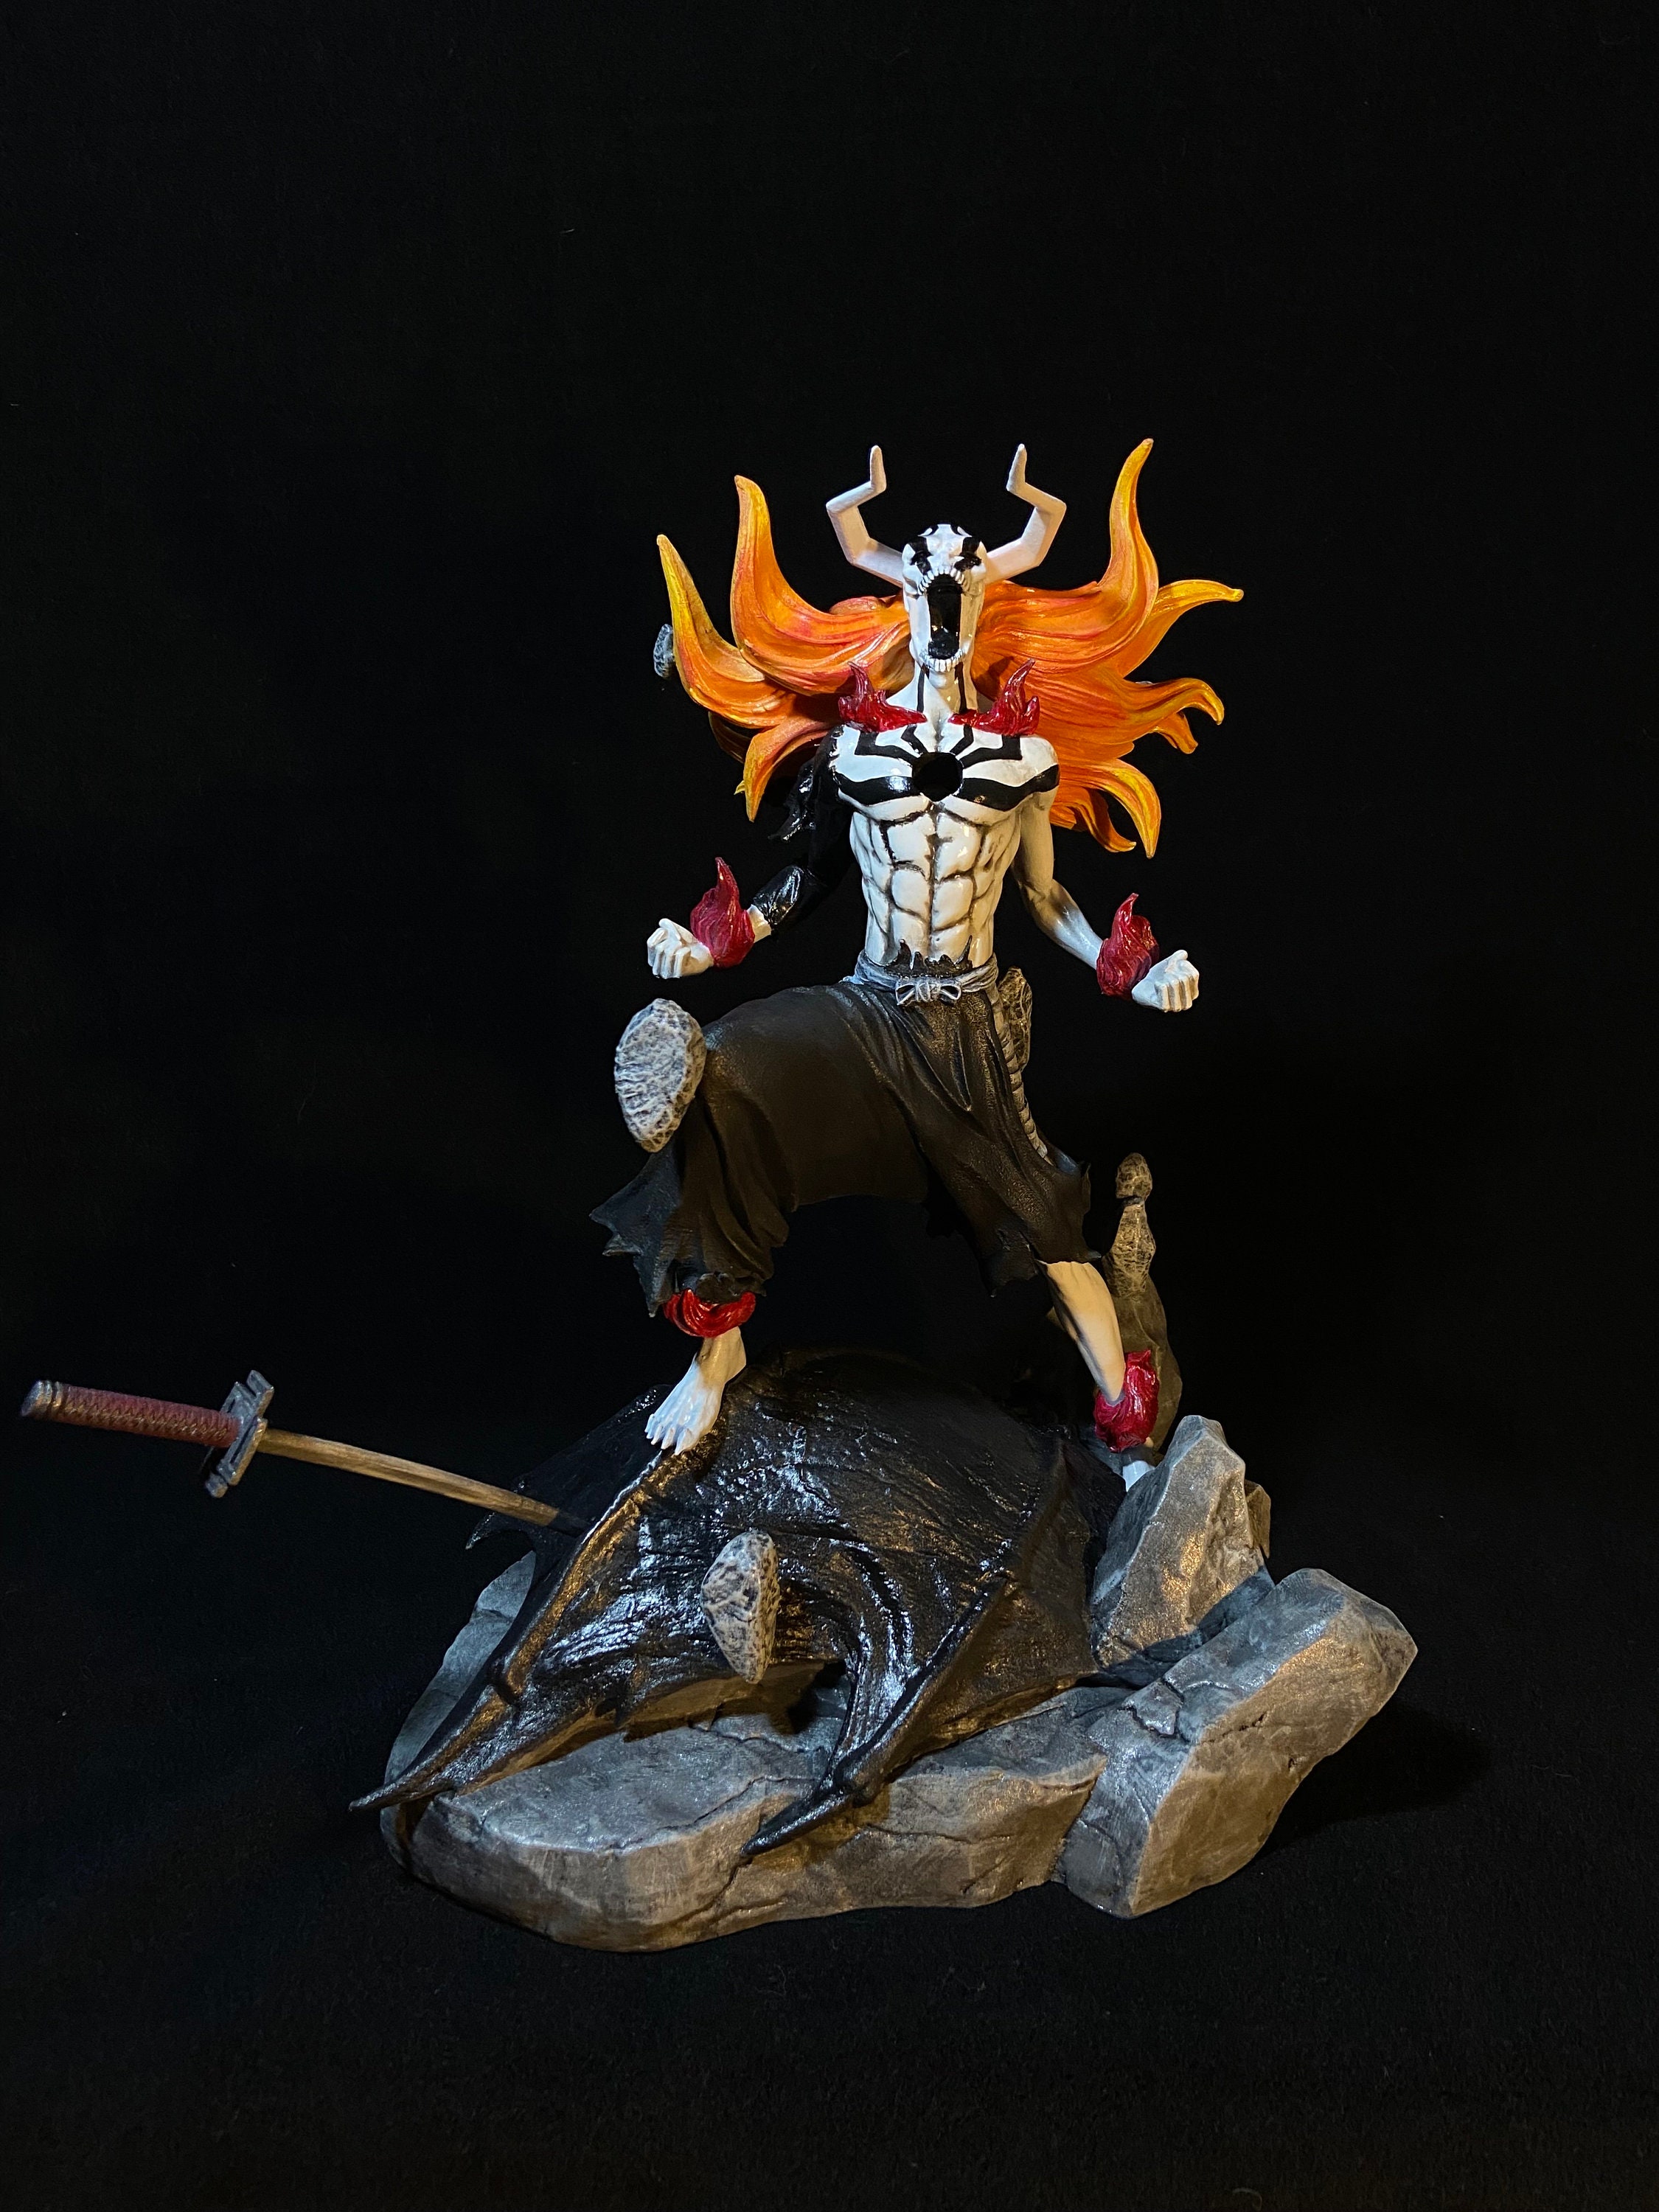 Vasto Lorde Mask with Moveable mouth and LED eyes